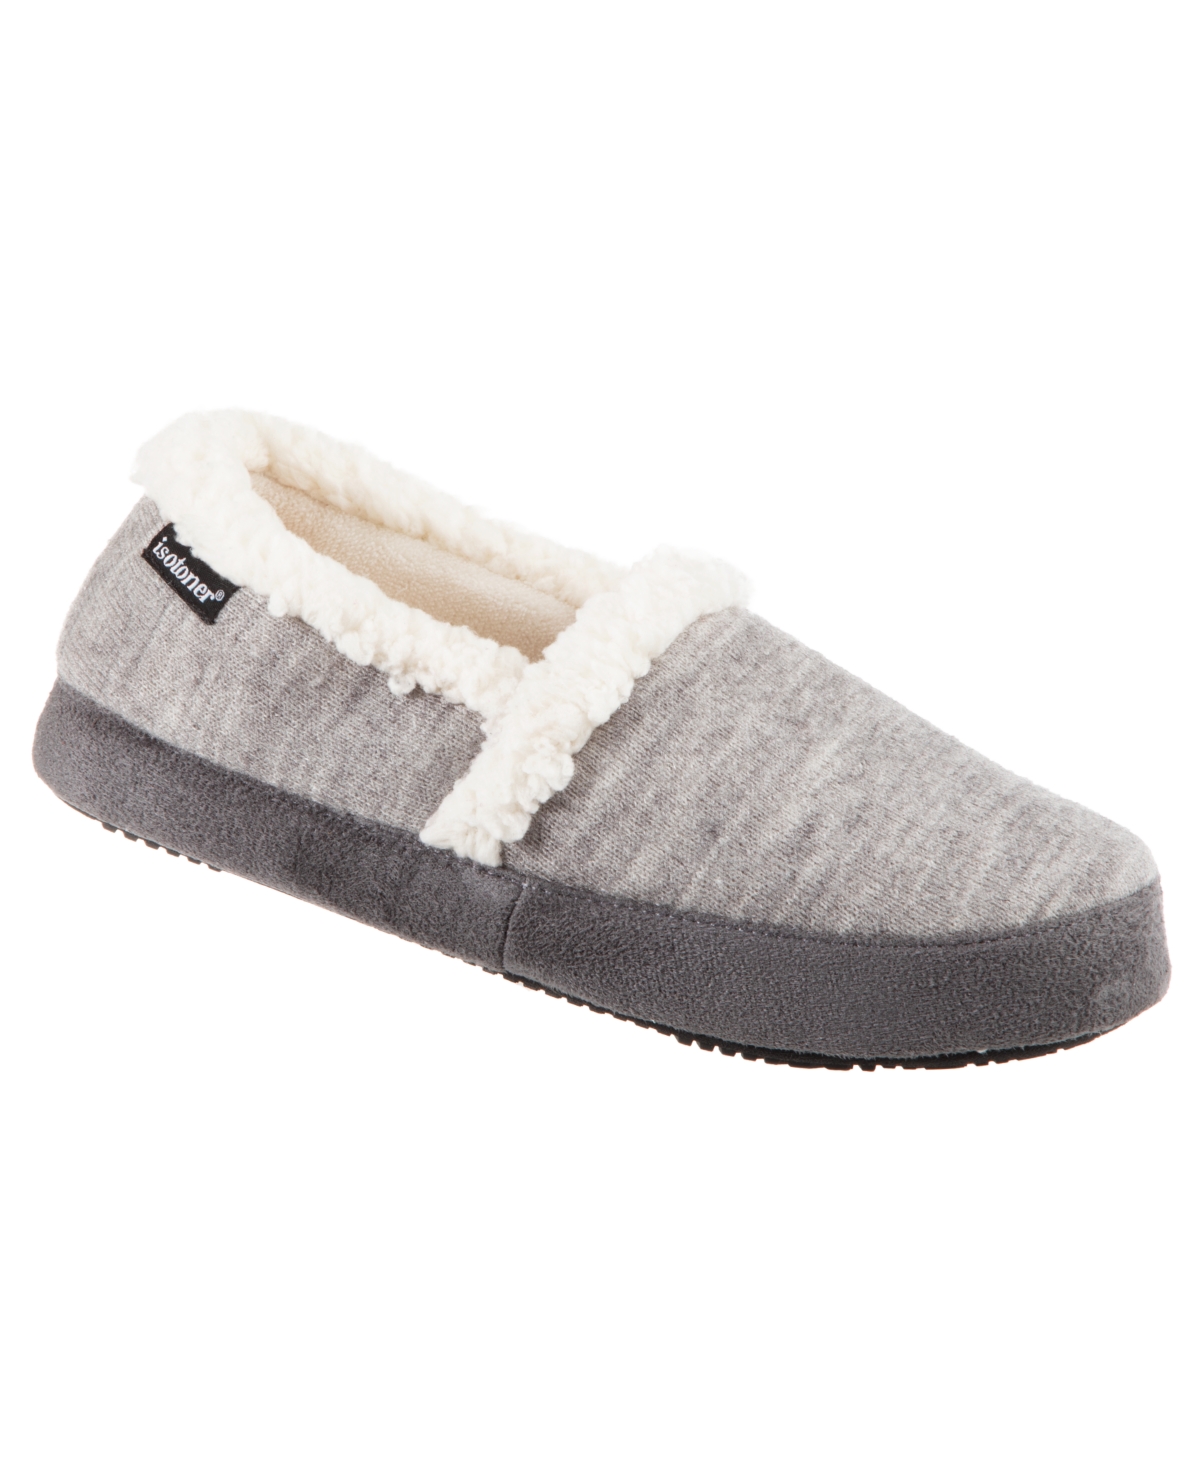 Isotoner Signature Women's Closed Back Slippers, Online Only